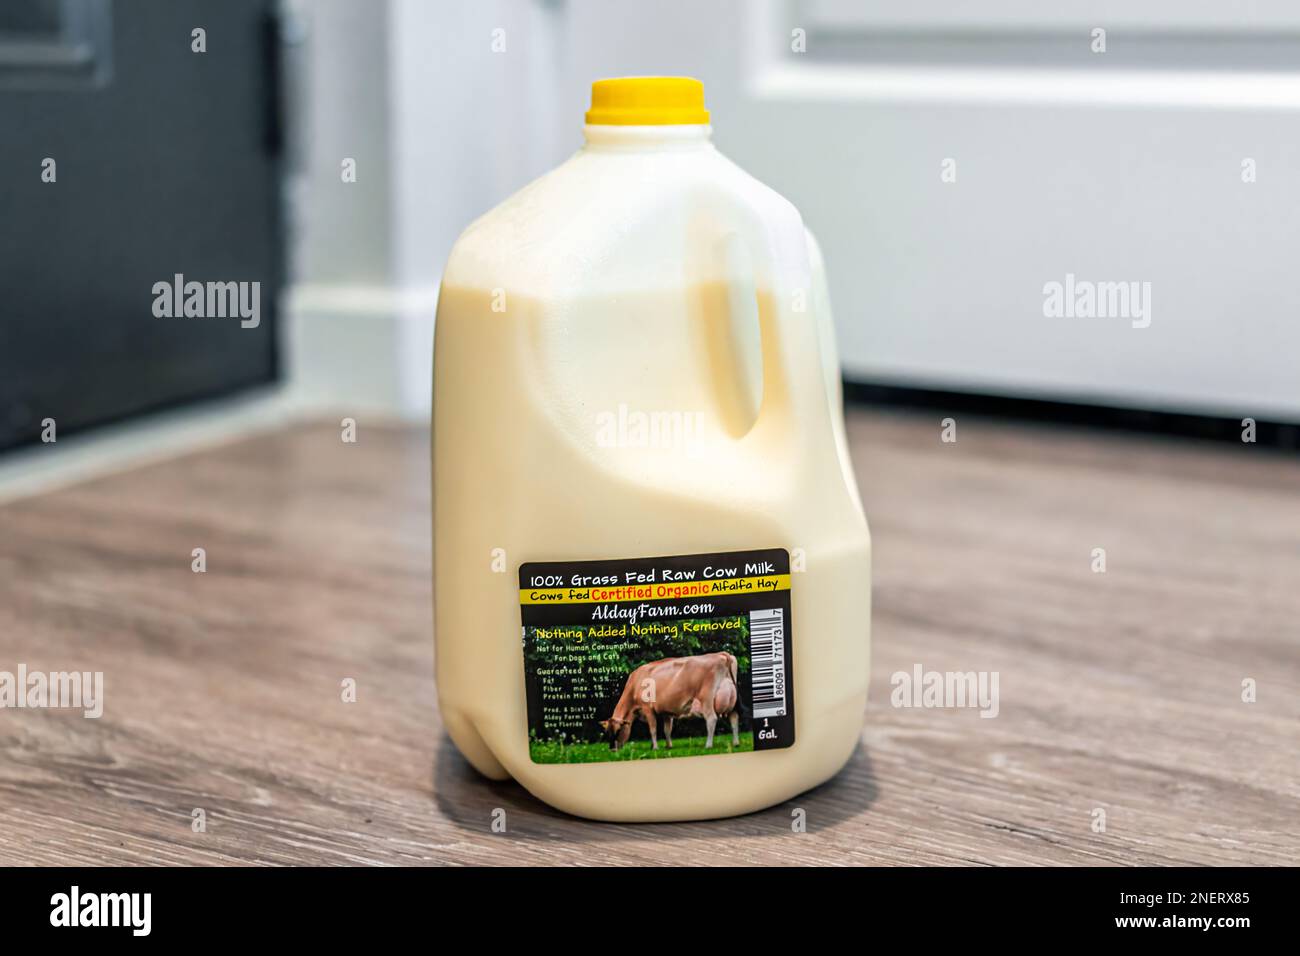 https://c8.alamy.com/comp/2NERX85/naples-usa-may-17-2022-gallon-plastic-jar-container-of-raw-unpasteurized-cow-dairy-milk-from-alday-florida-farm-not-for-human-consumption-2NERX85.jpg